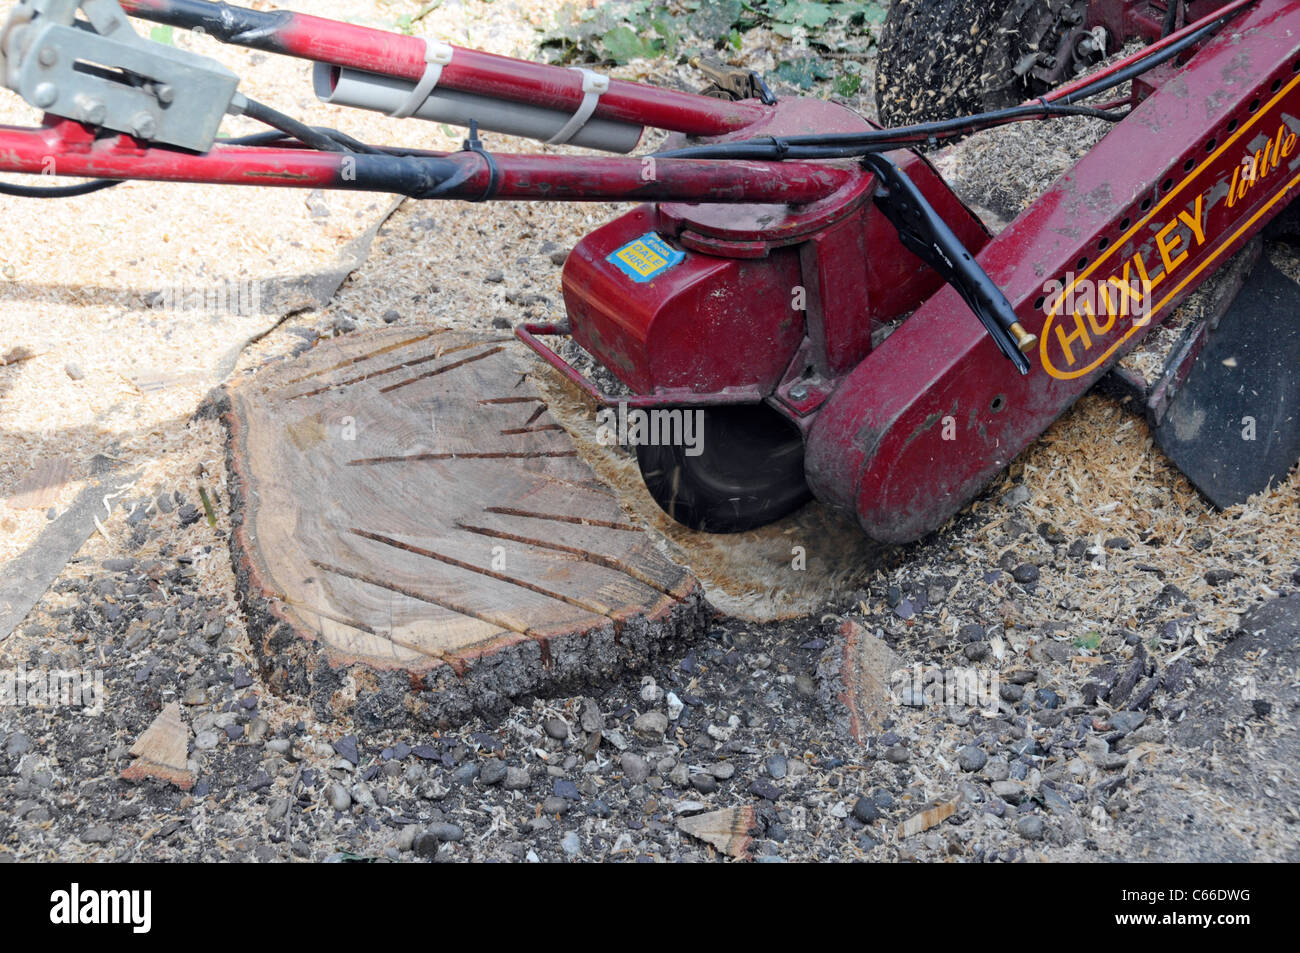 Sawdust from stump grinder machine used on remains of oak tree reduce height in preparation for paving to front garden house driveway Essex England UK Stock Photo